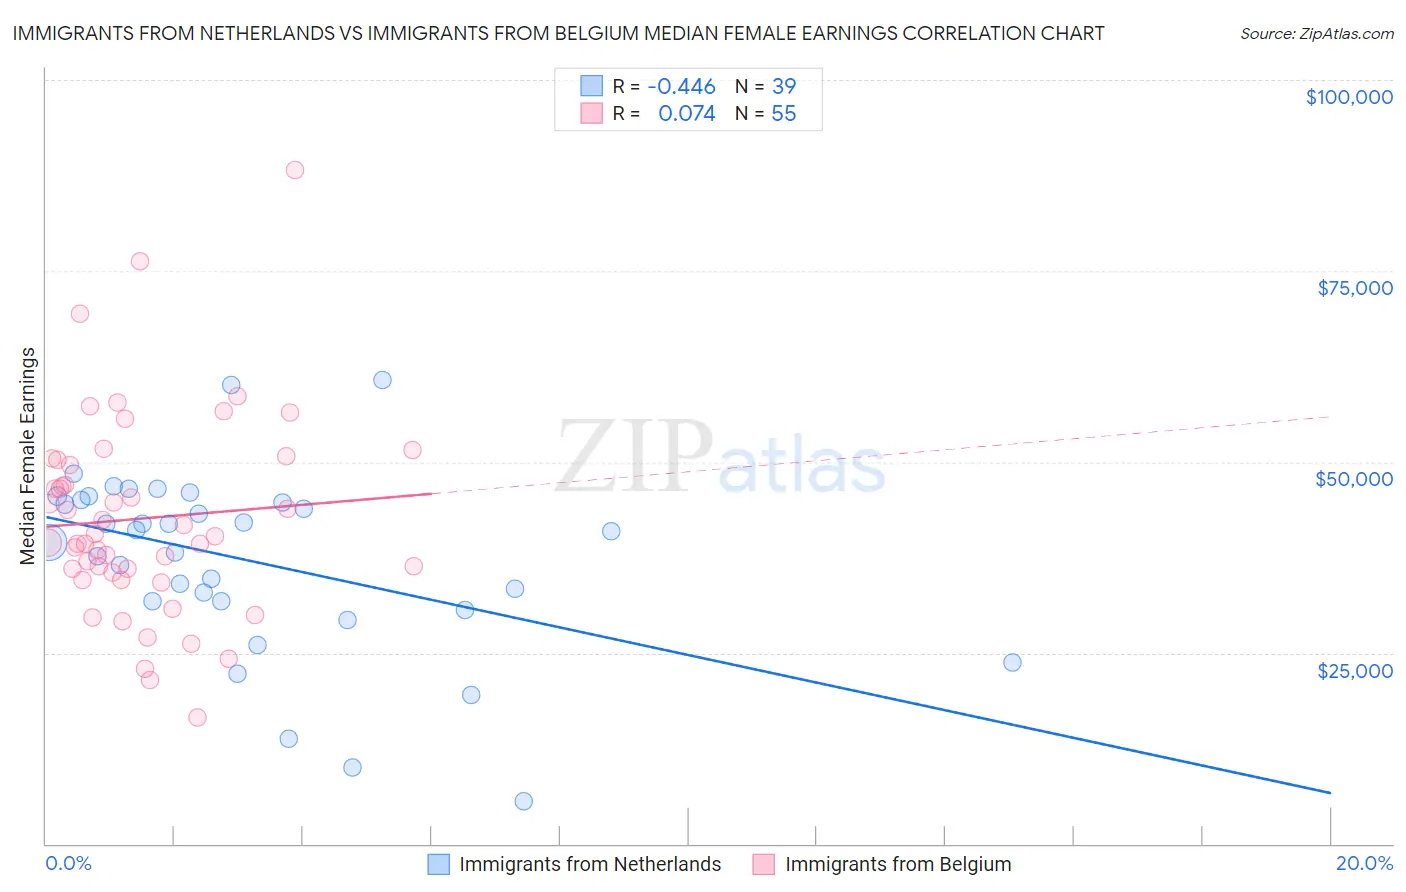 Immigrants from Netherlands vs Immigrants from Belgium Median Female Earnings